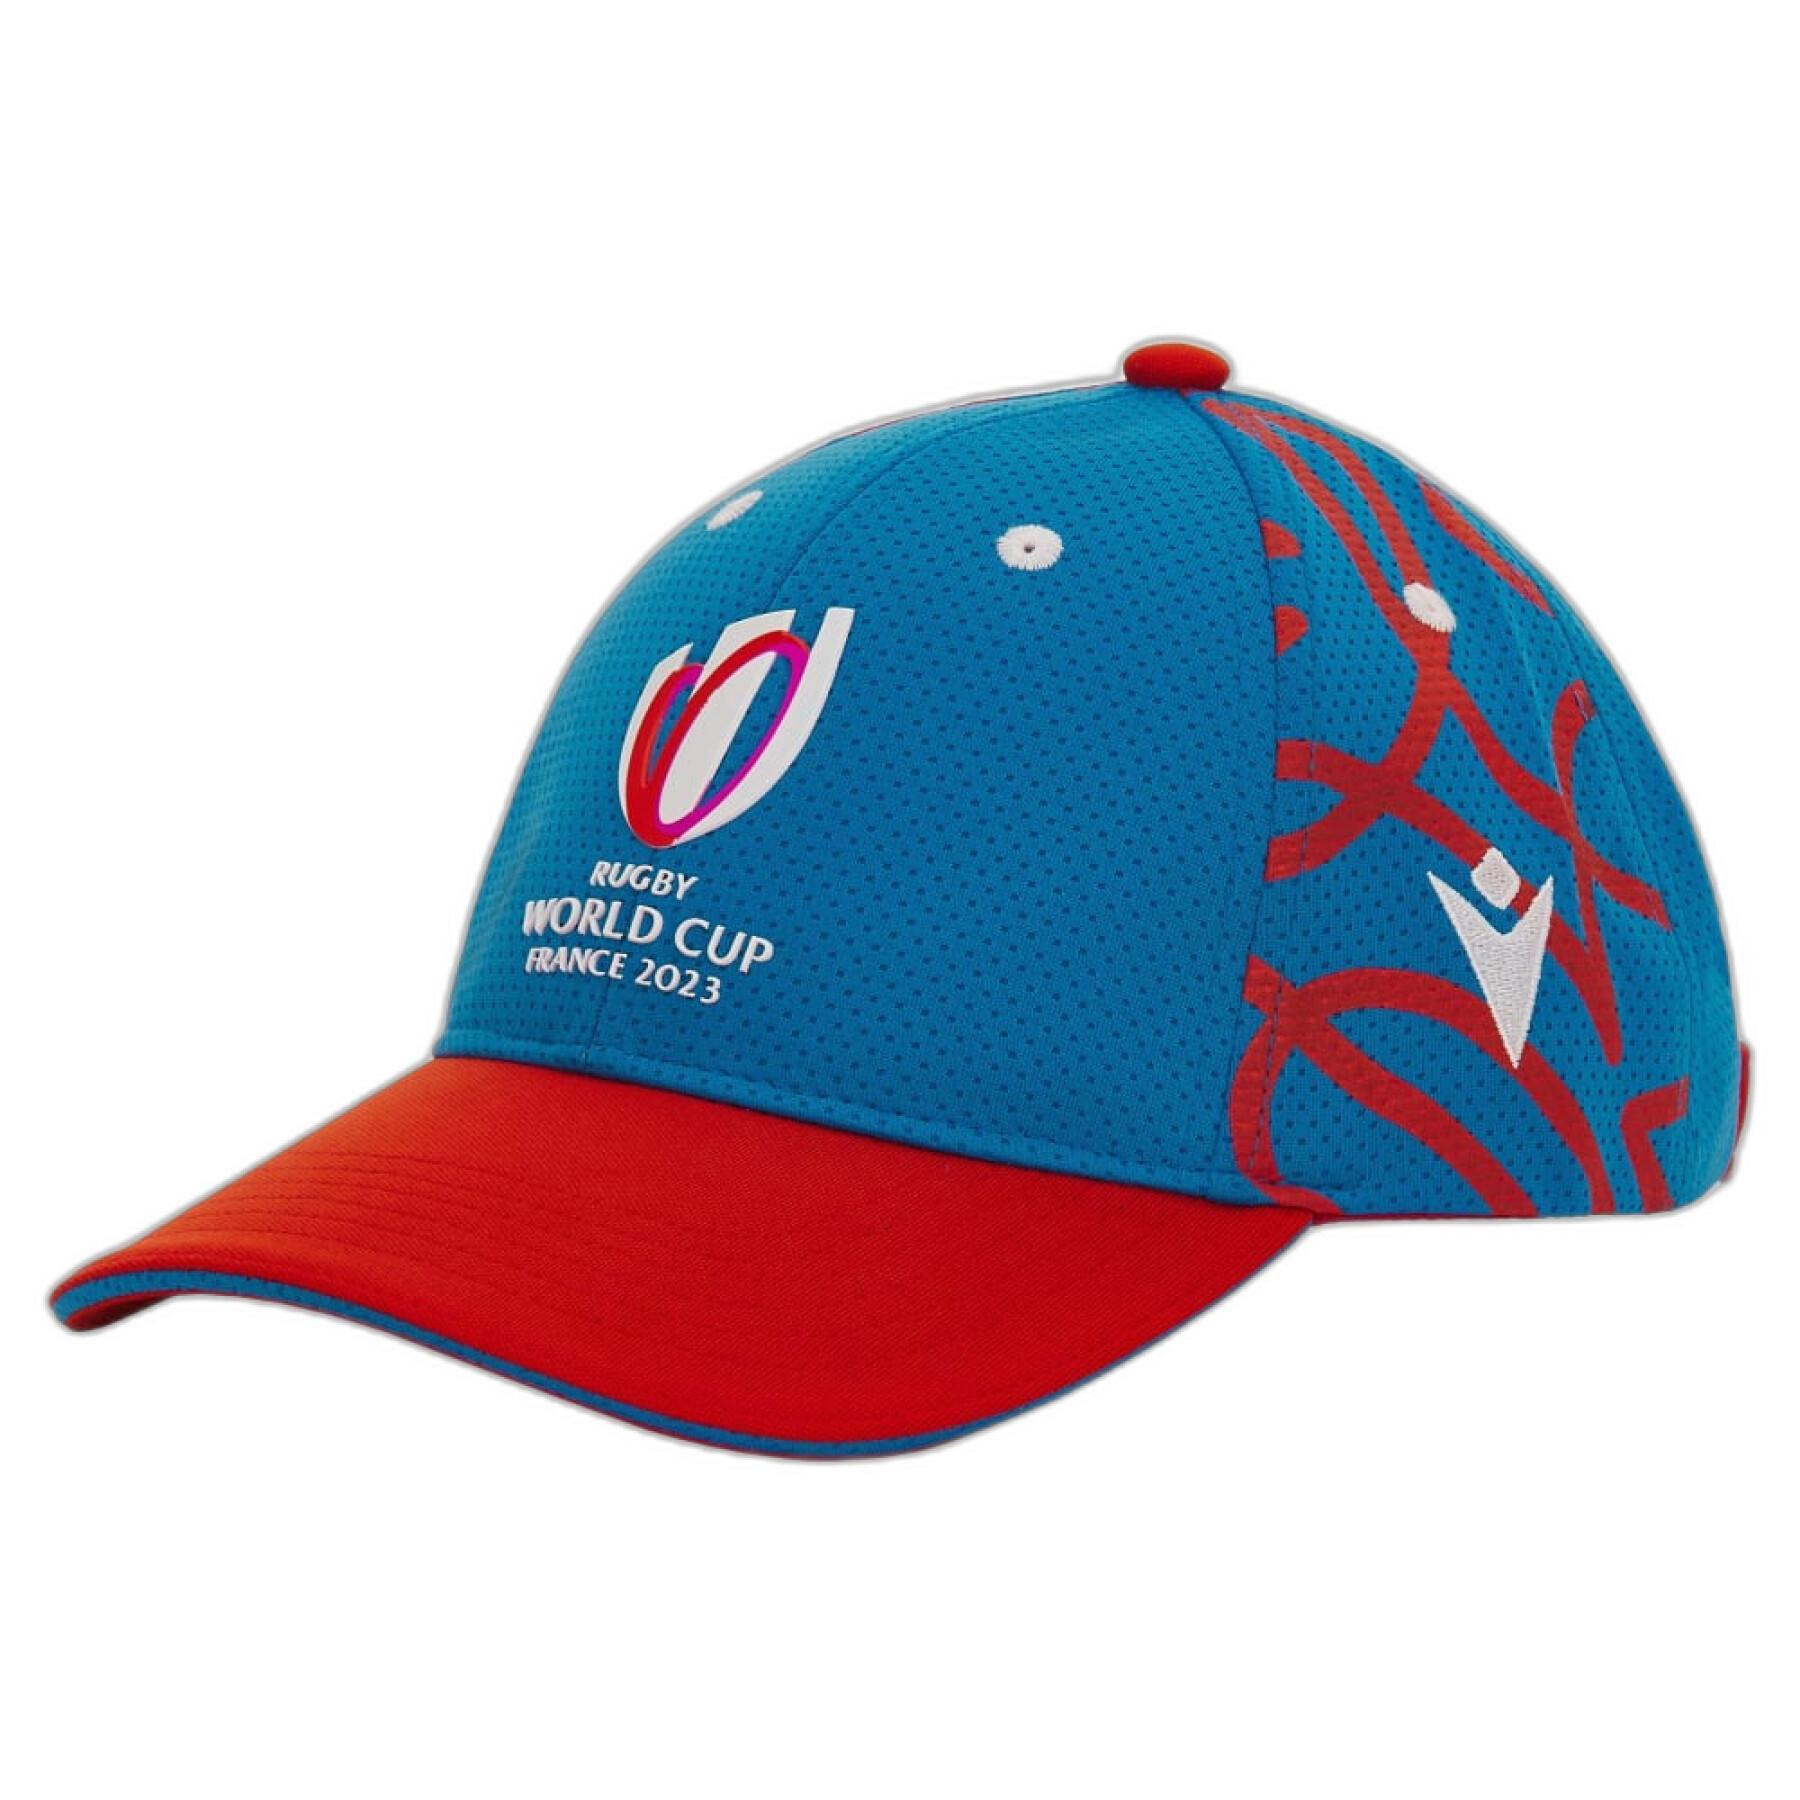 Rugby world cup cap 2023 france 